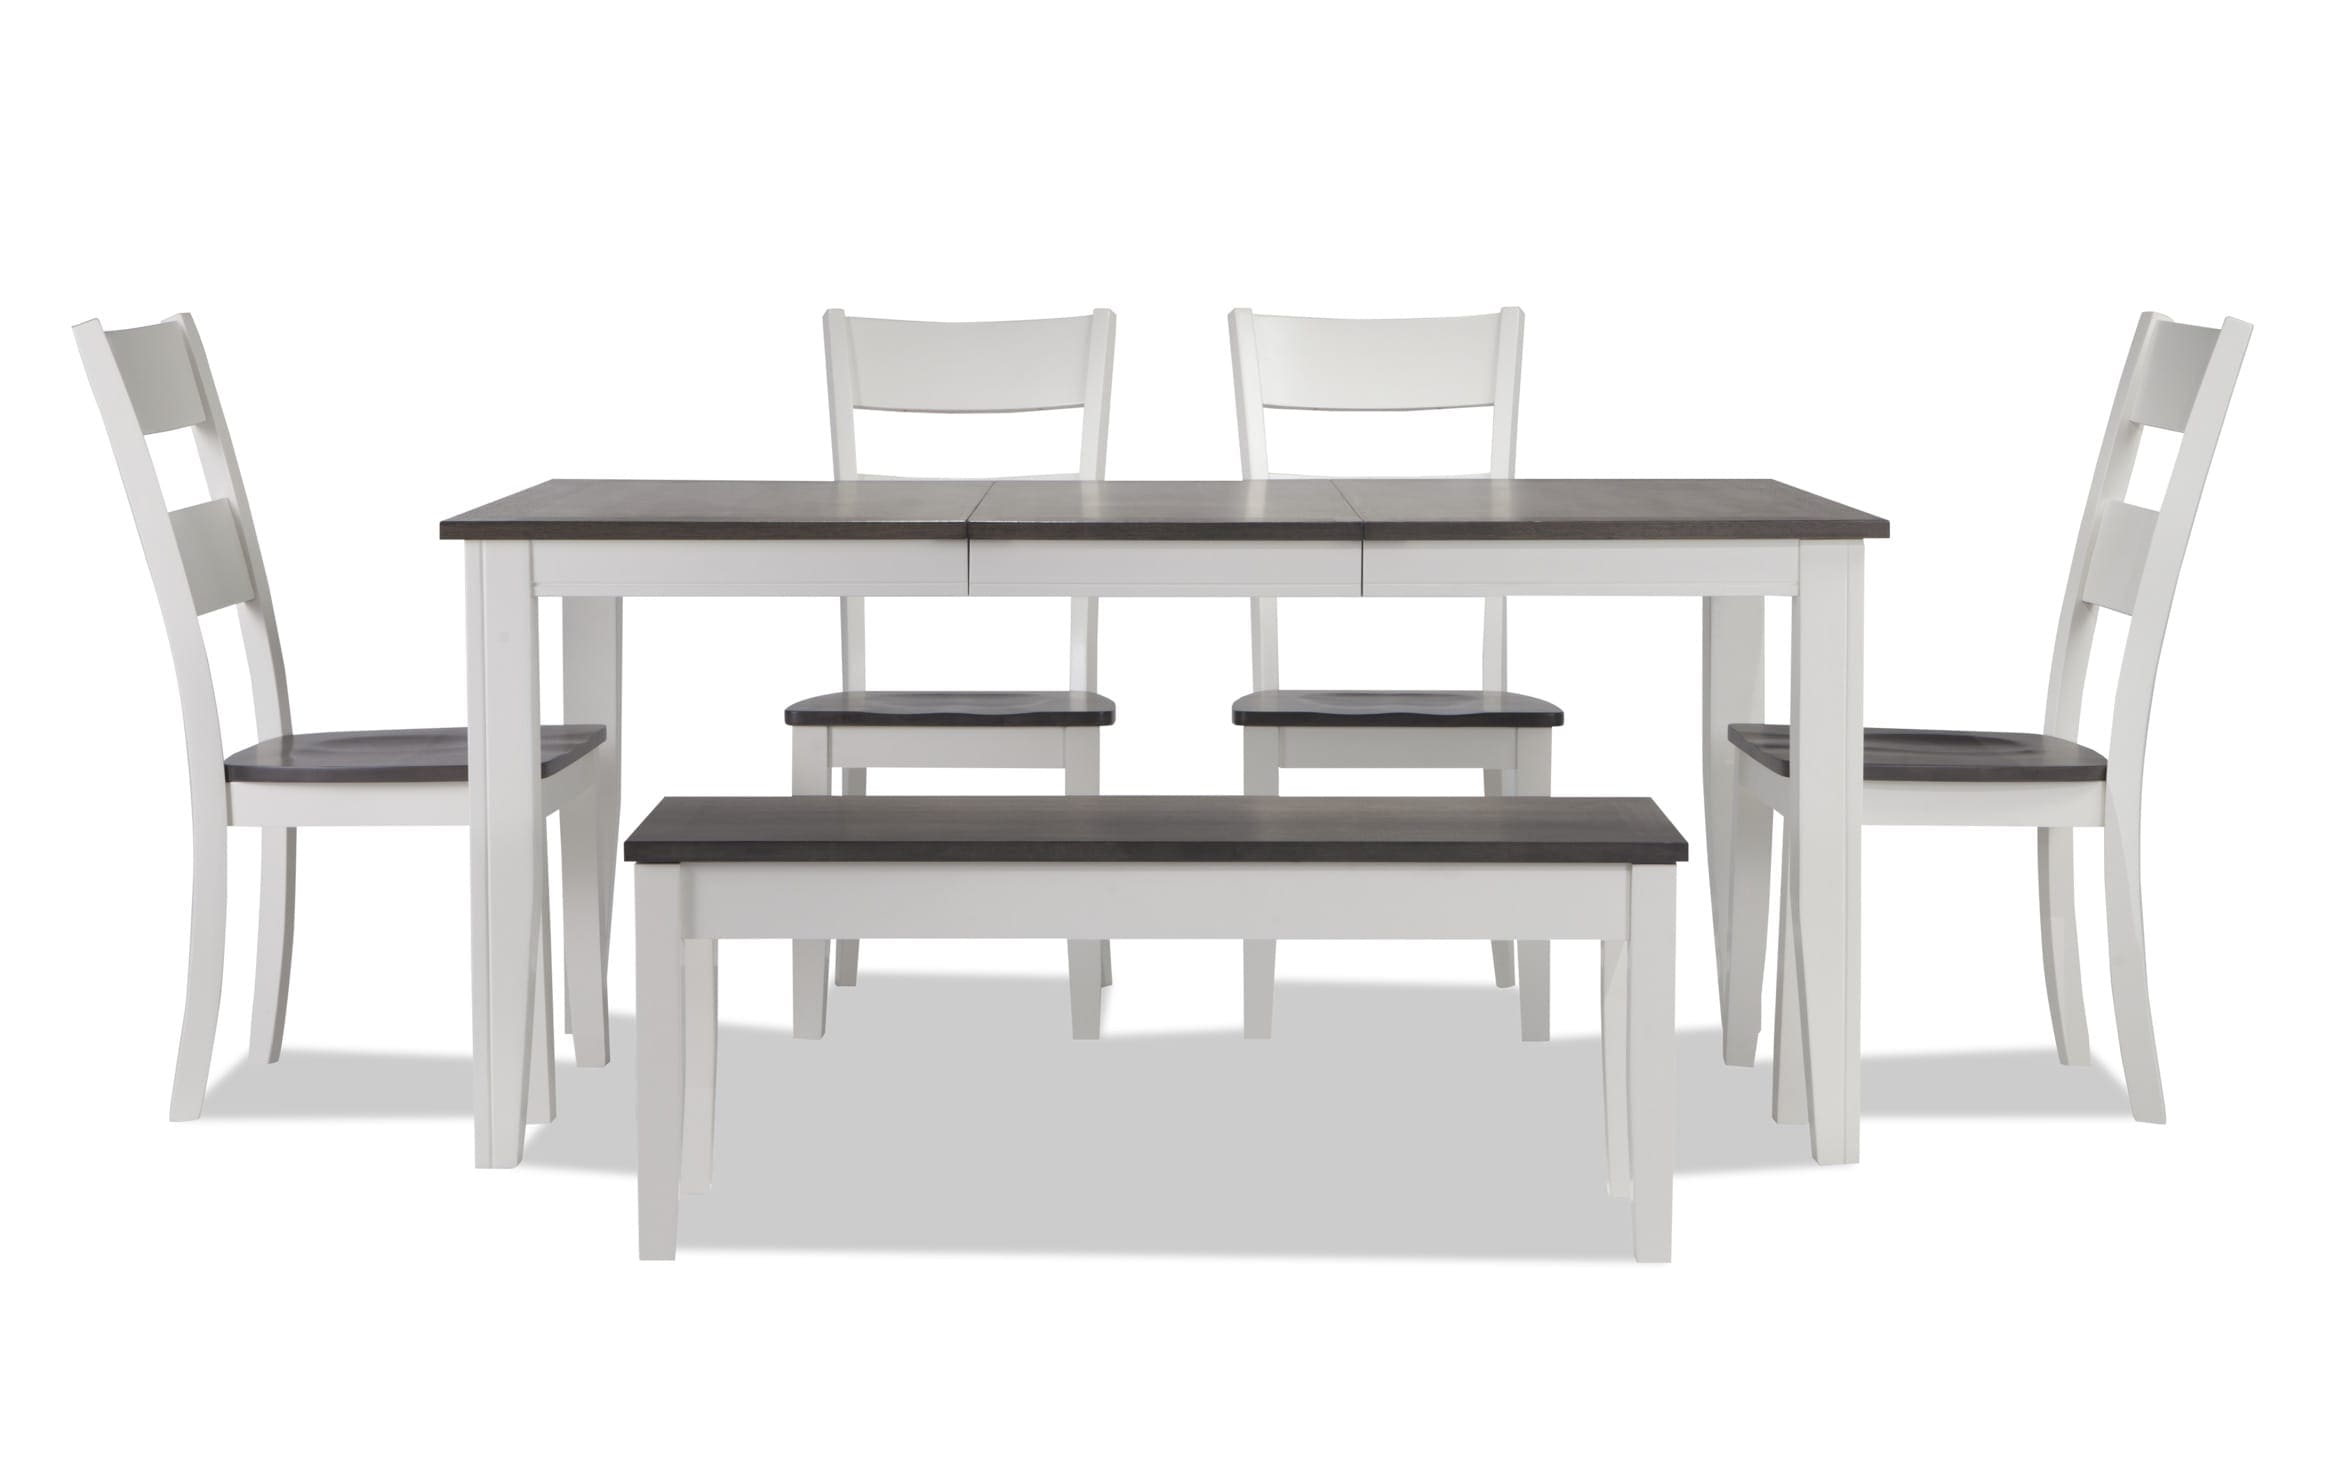 Blake Gray White 6 Piece Dining Set, Dining Room Table And Chairs With Bench Set Of 6